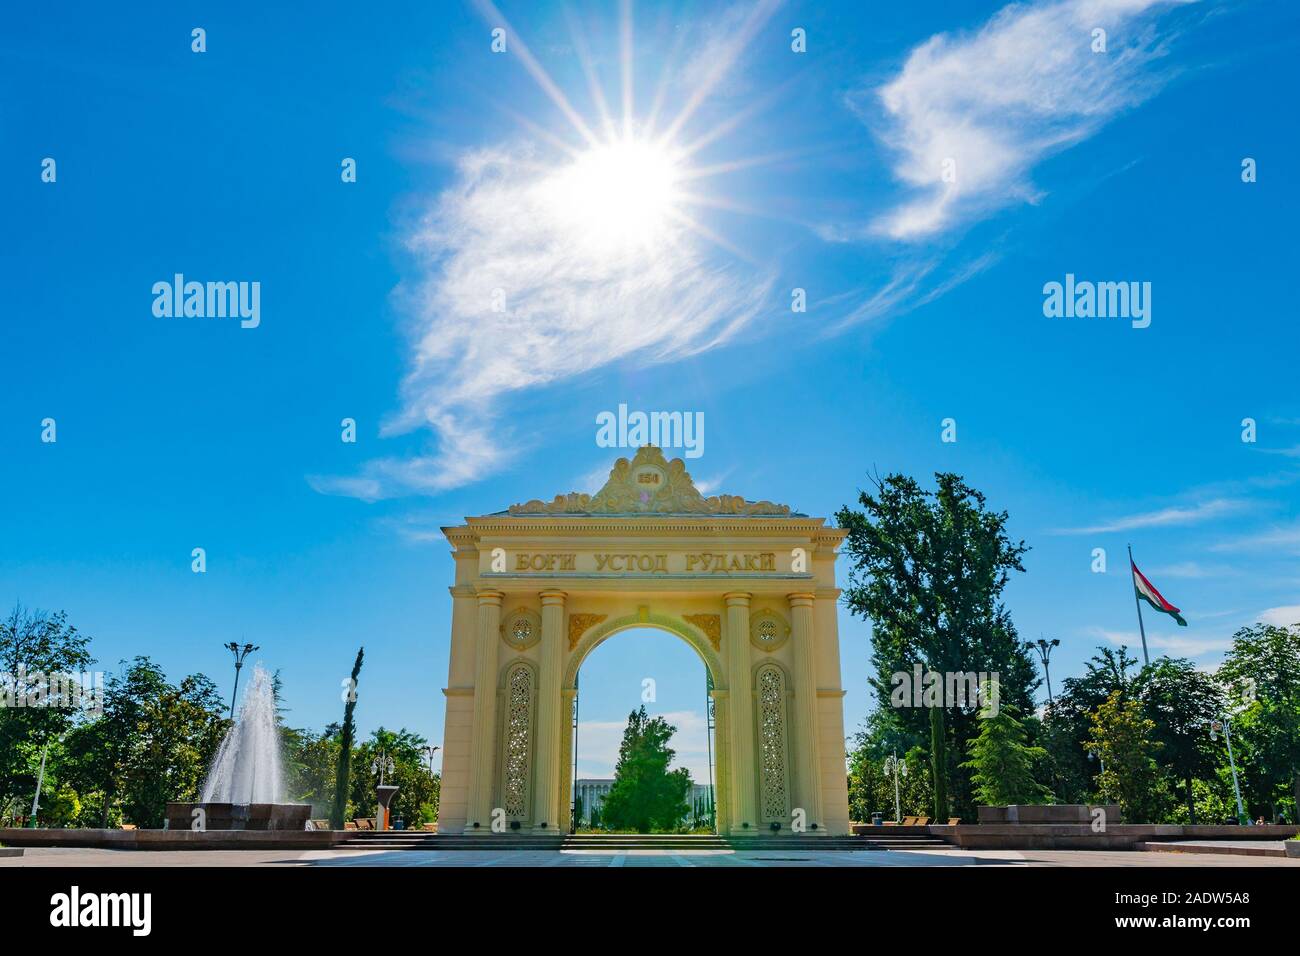 Dushanbe Abu Abdullah Rudaki Park Picturesque View Arch of Triumph Entrance Gate with Flowers on a Cloudy Rainy Day Stock Photo